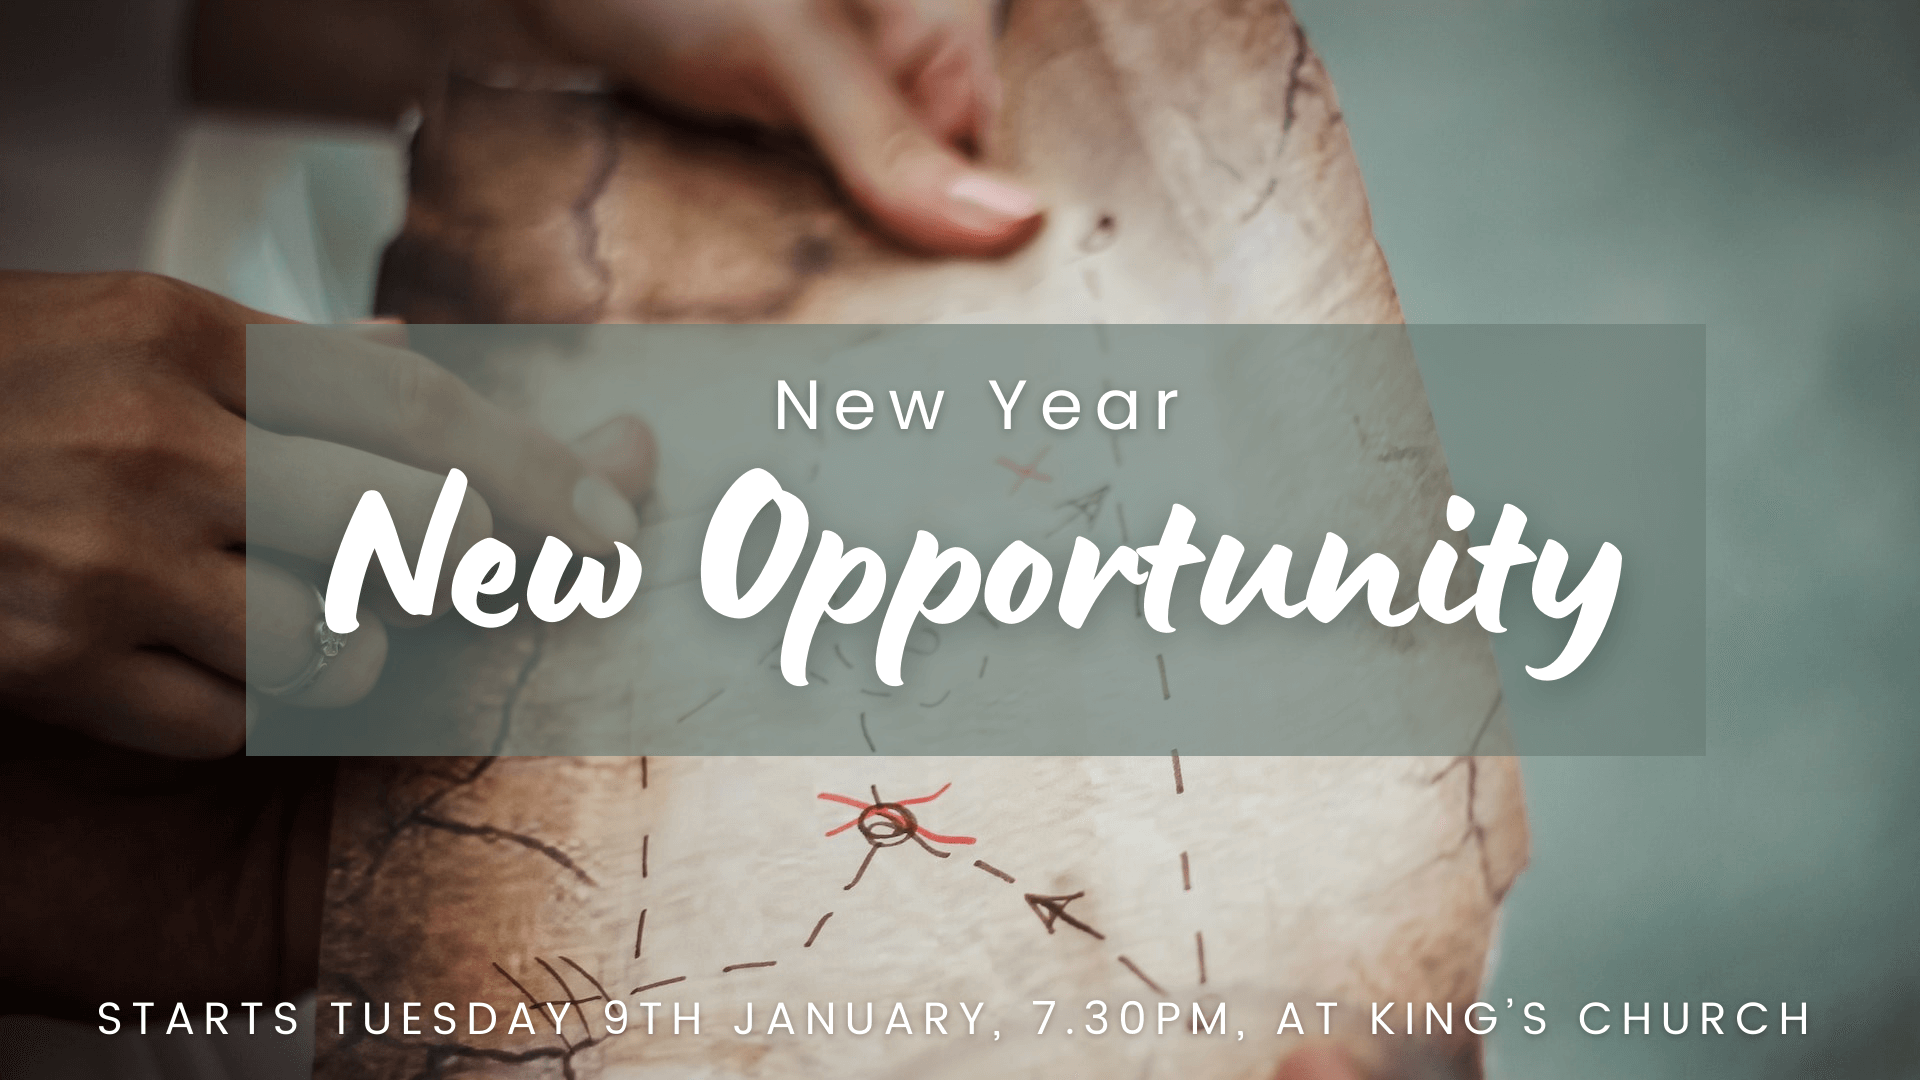 New Year New Opportunity